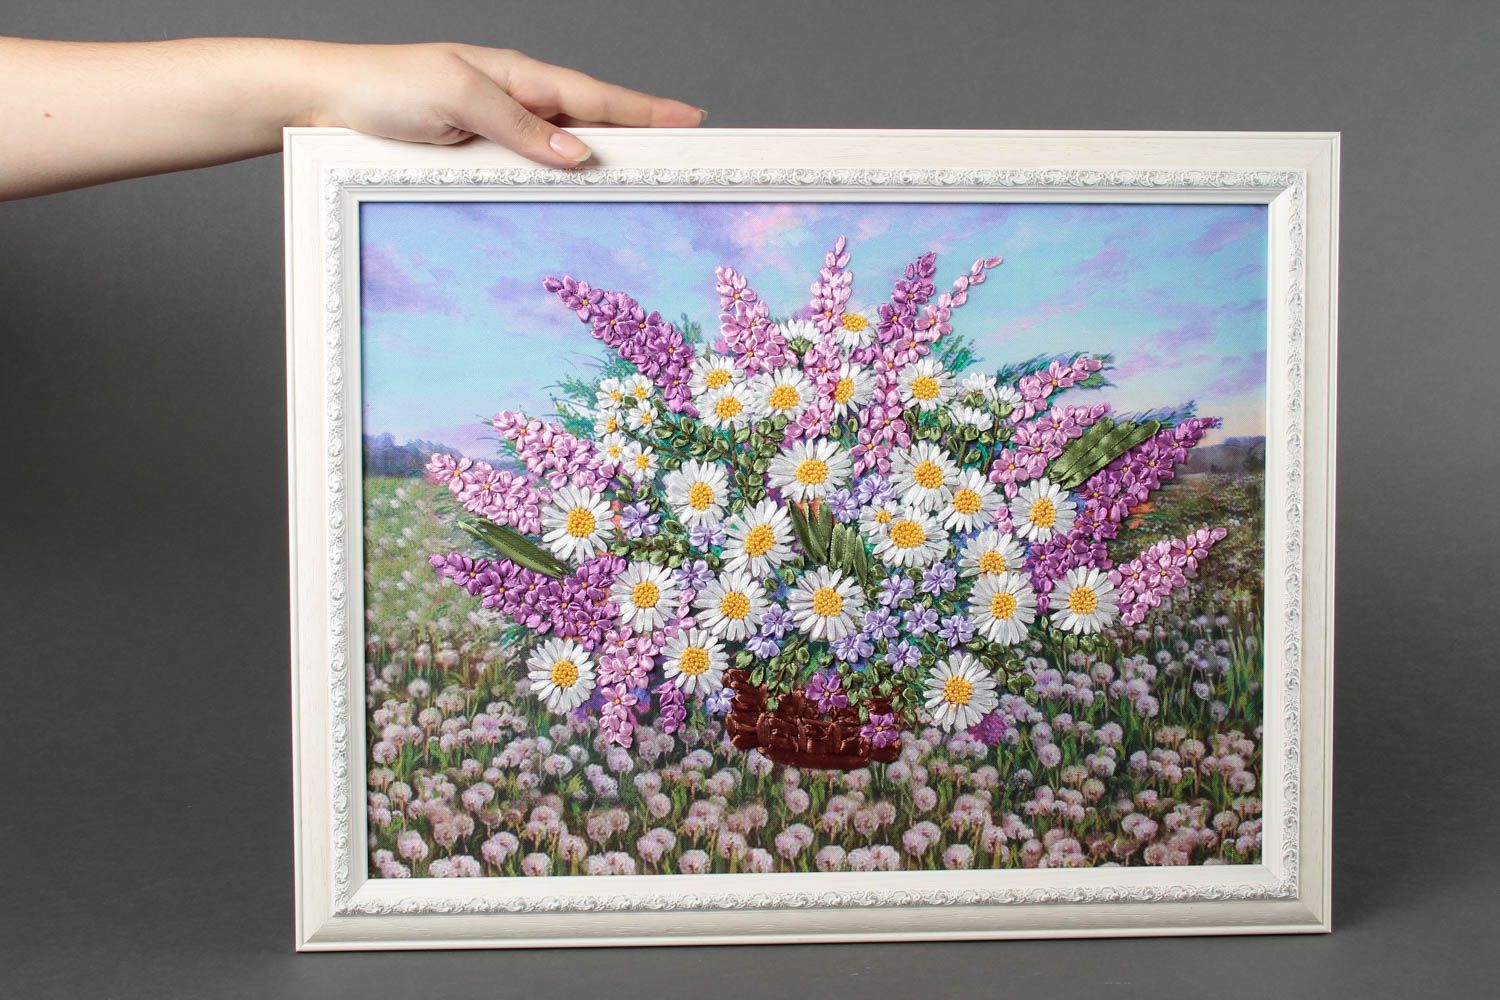 Handmade embroidered picture decoration for interior decorative wall panel photo 1